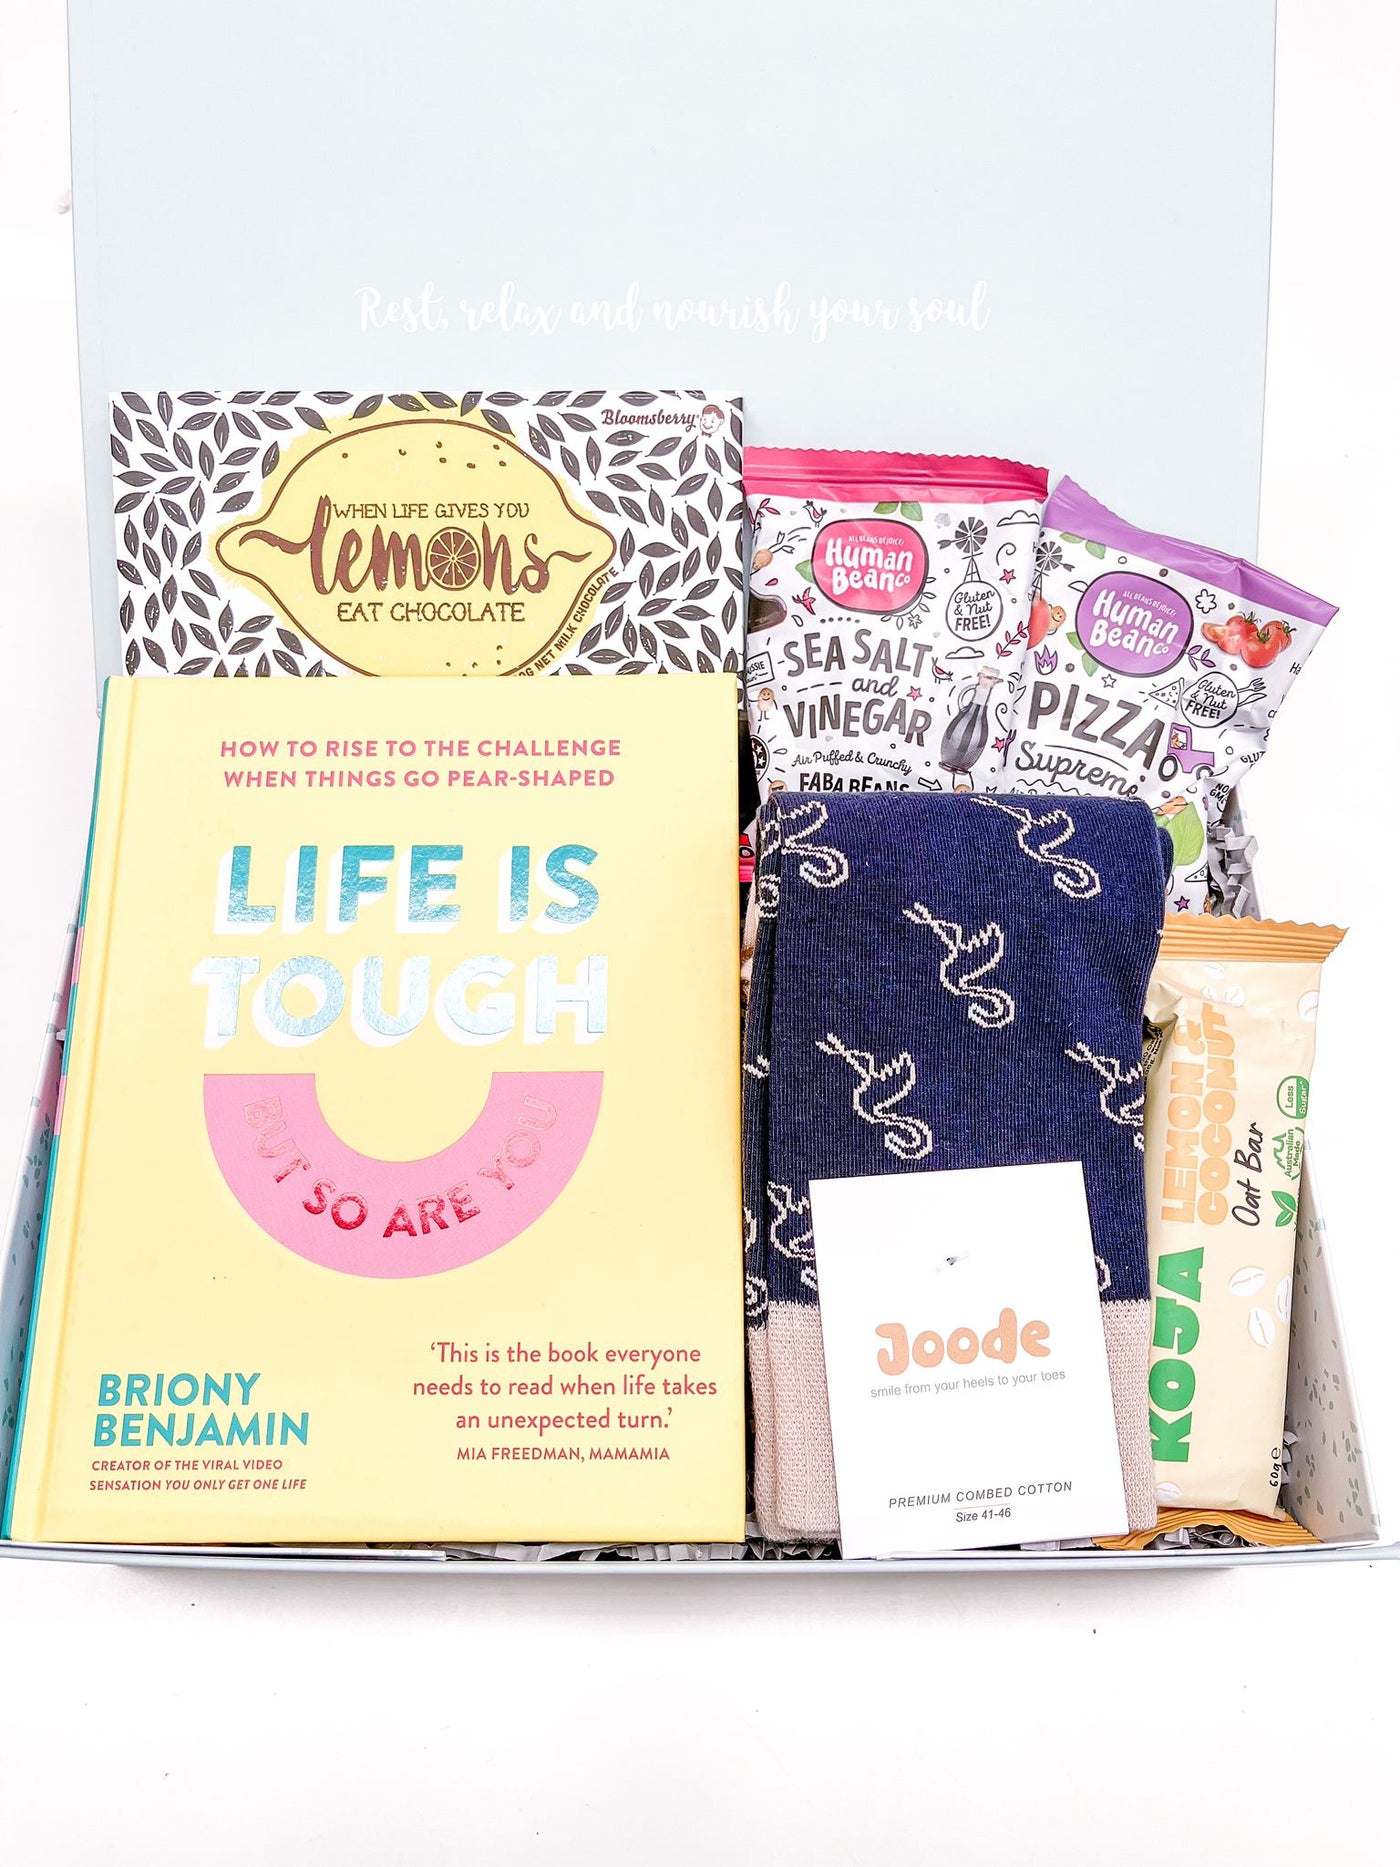 Mindfulness Care Package